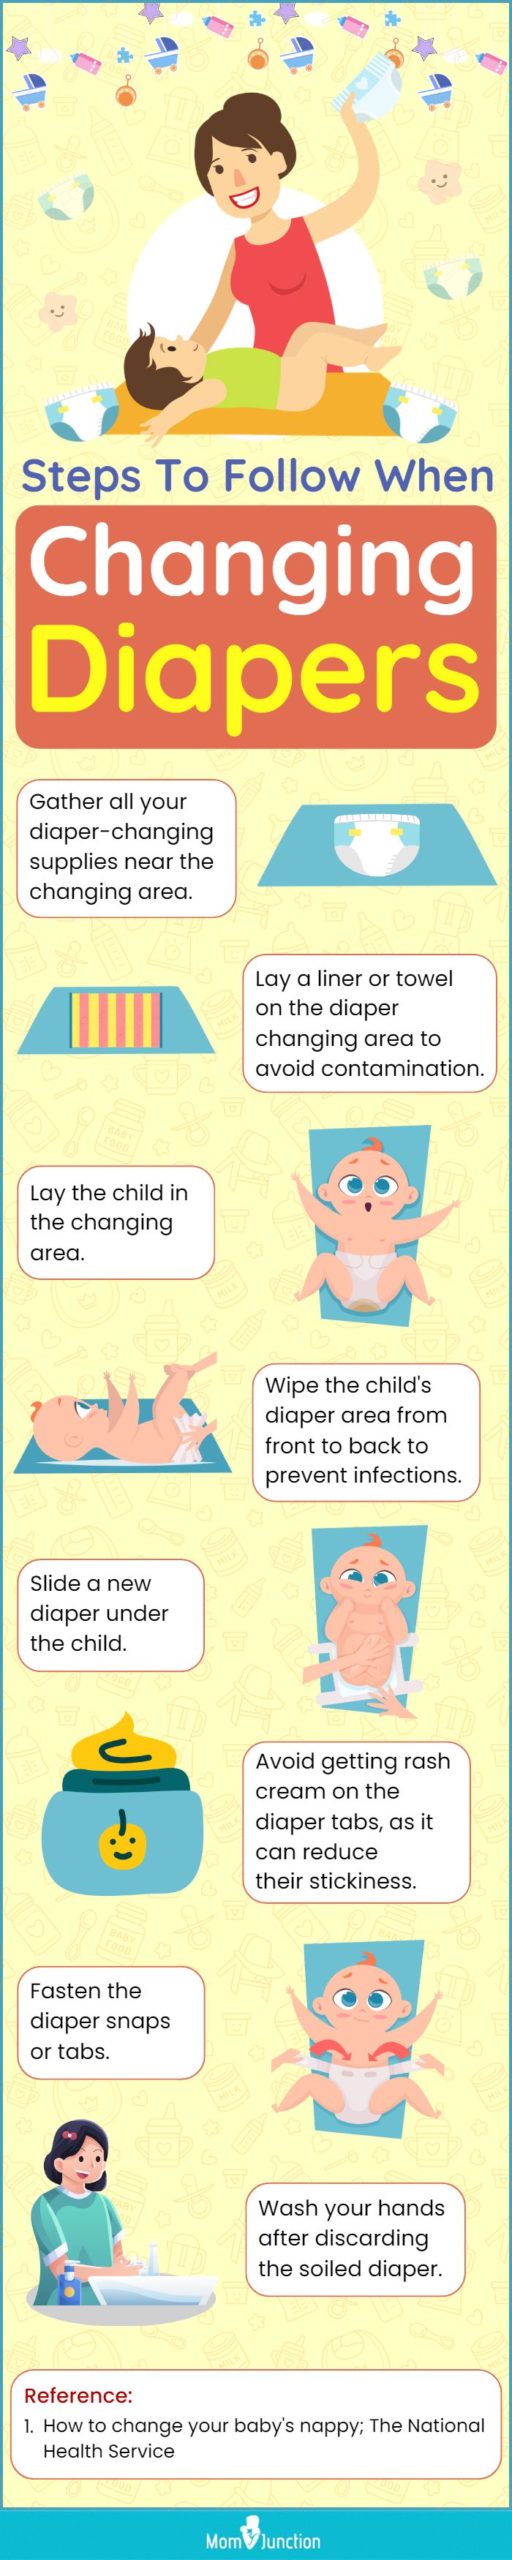 Steps To Follow When Changing Diapers